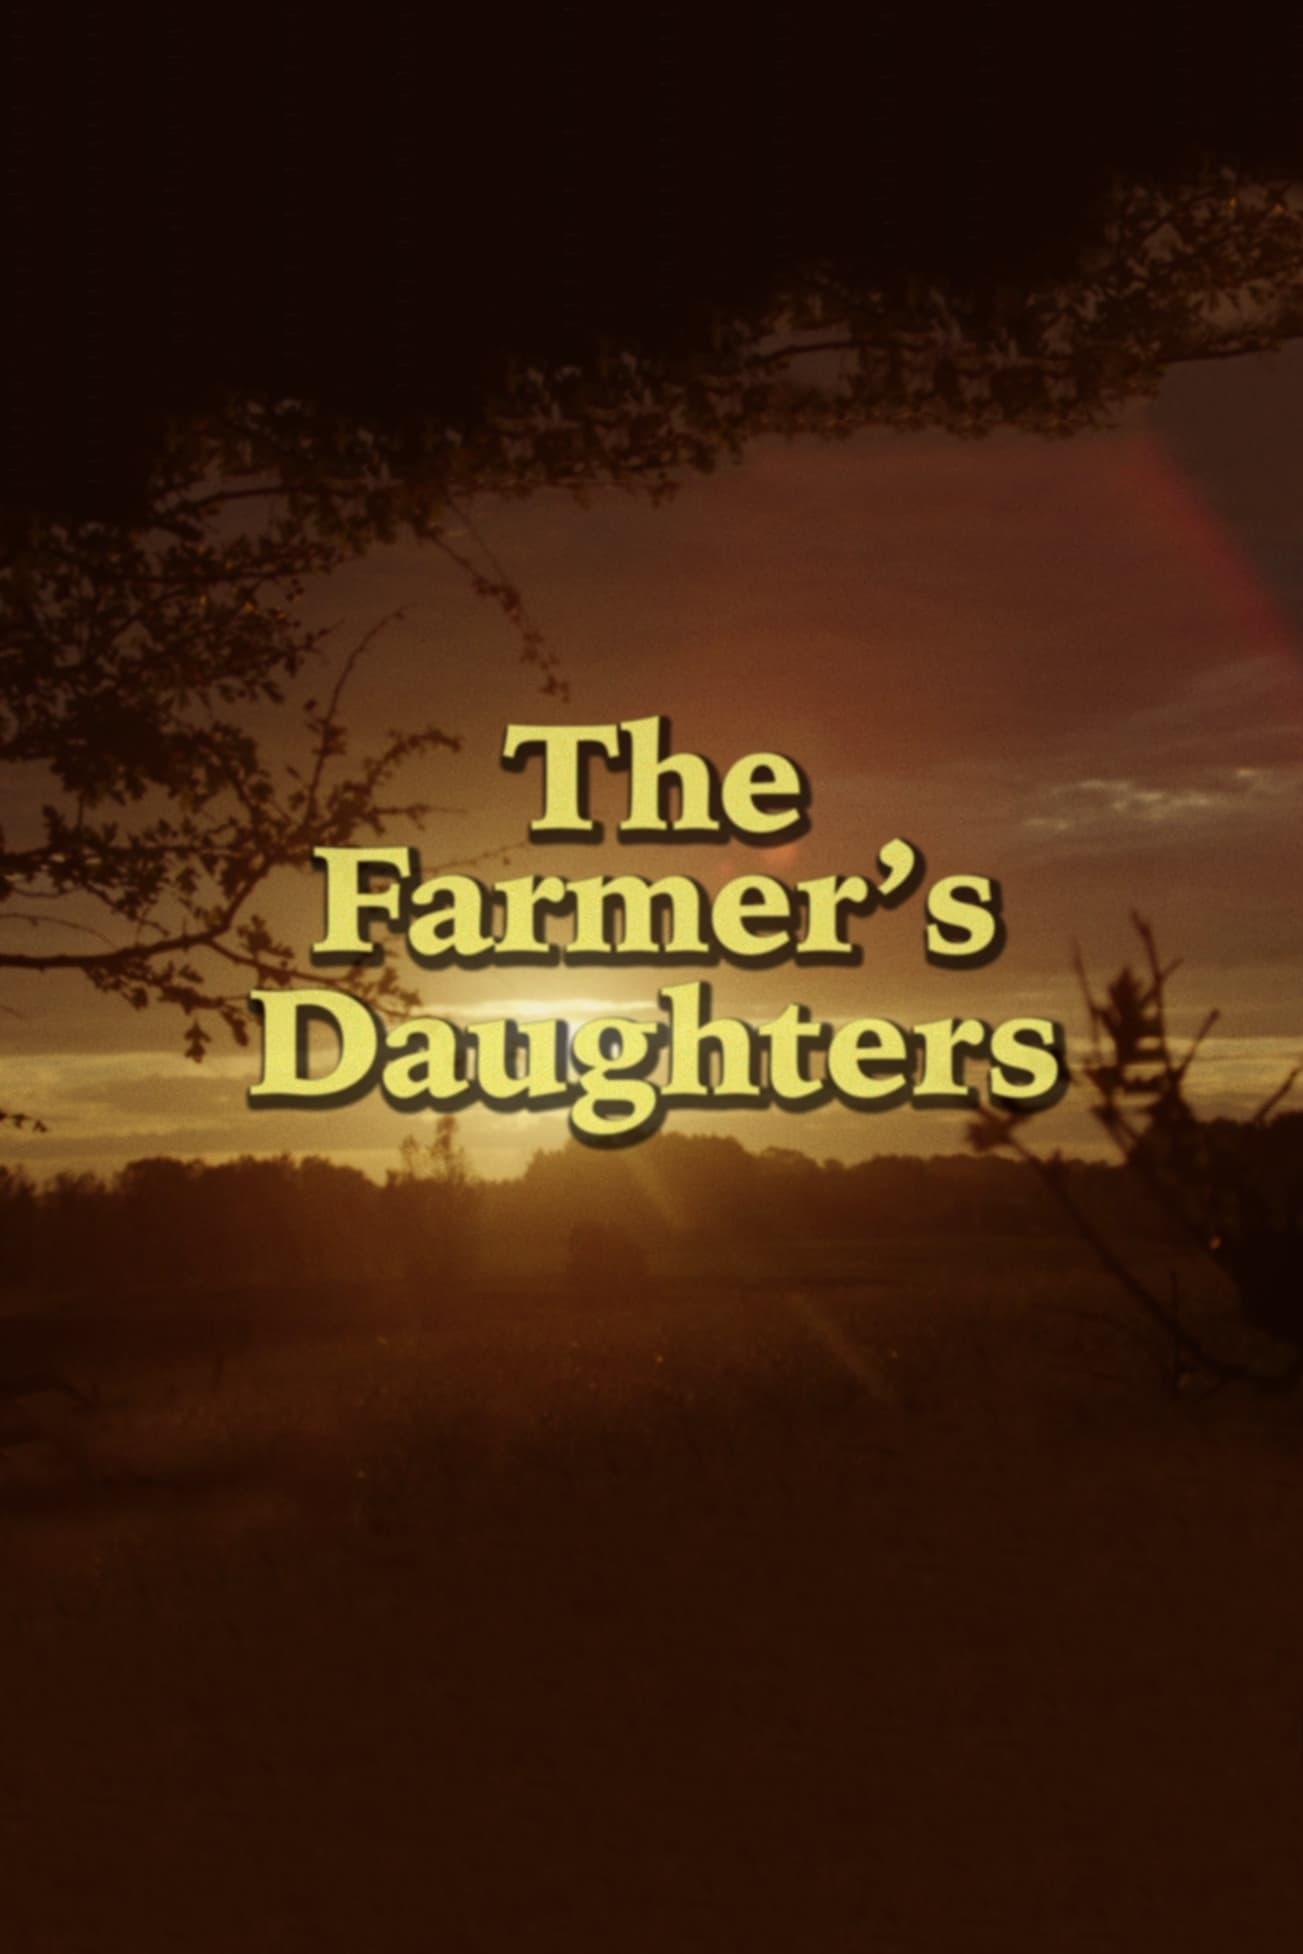 The Farmer's Daughters poster